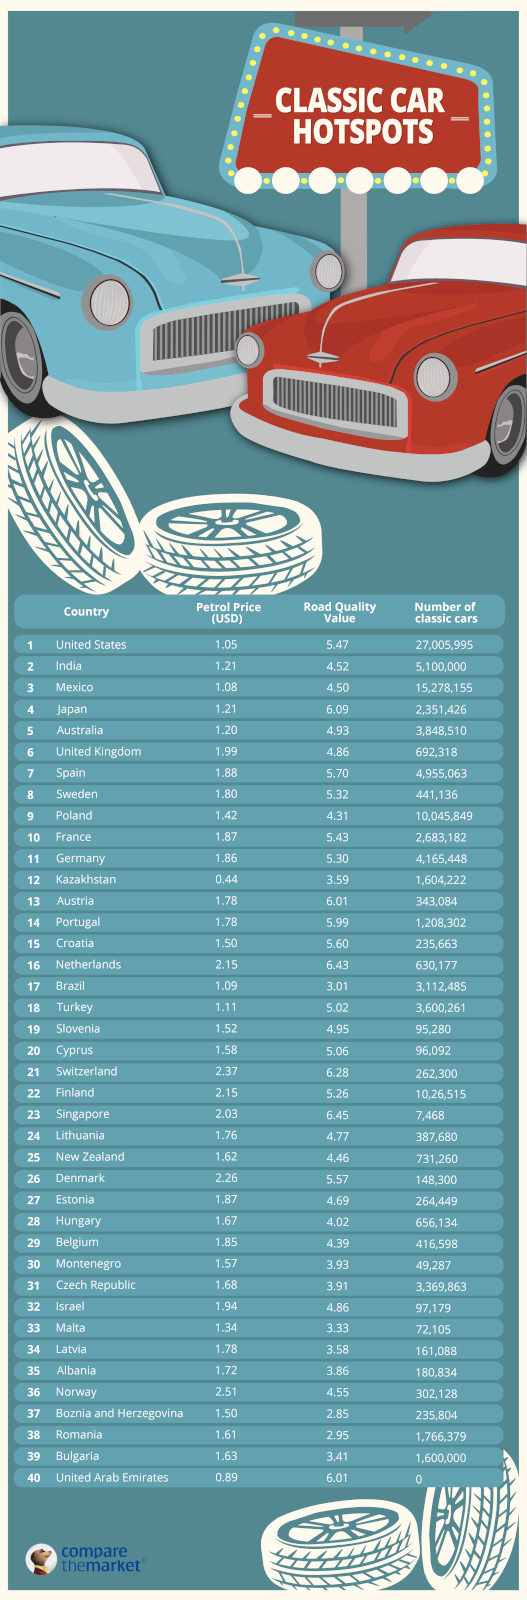 Table showing the countries which are hotspots for classic cars, with petrol prices in USD.